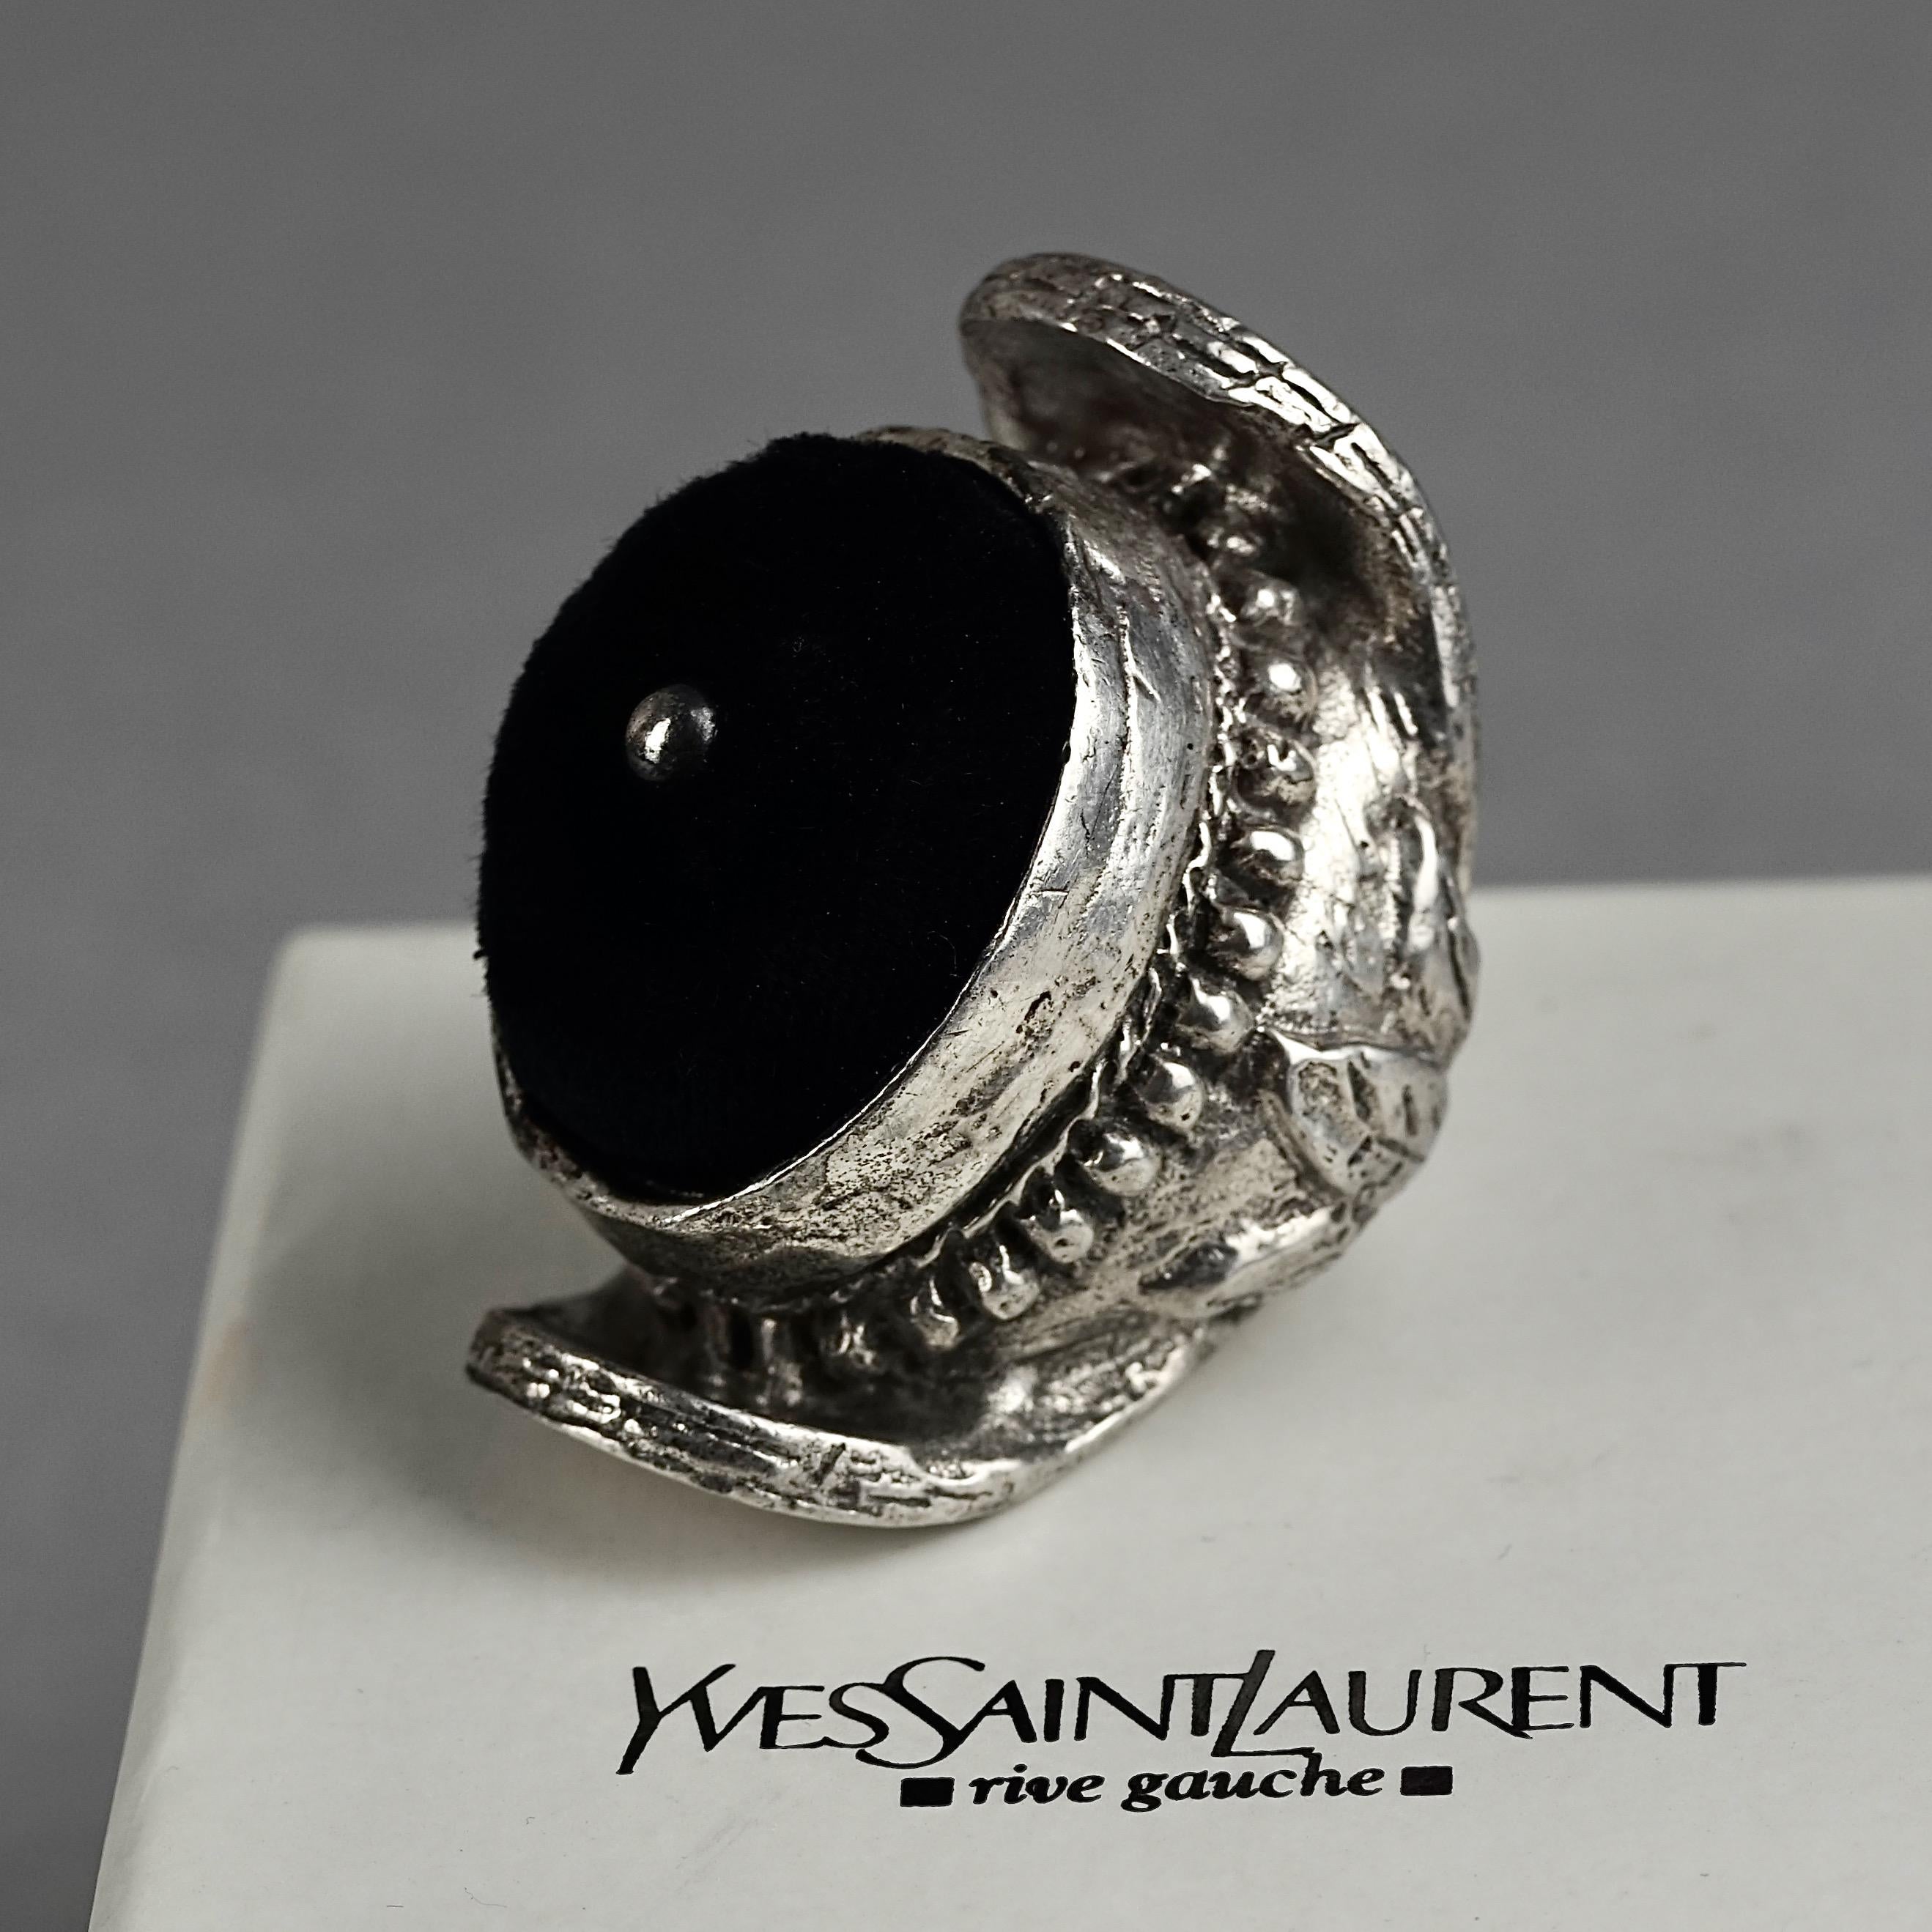 Vintage YVES SAINT LAURENT Ysl by Tom Ford Velvet Sterling Silver Ring
From 2002 Runway Collection
taille 7.         54.   longueur 4,7 cm.  largeur 3,1 cm.   hauteur 4 cm
Approximate Measurements:
Height: 3 inches (4 cm)
Width: inches (3.1